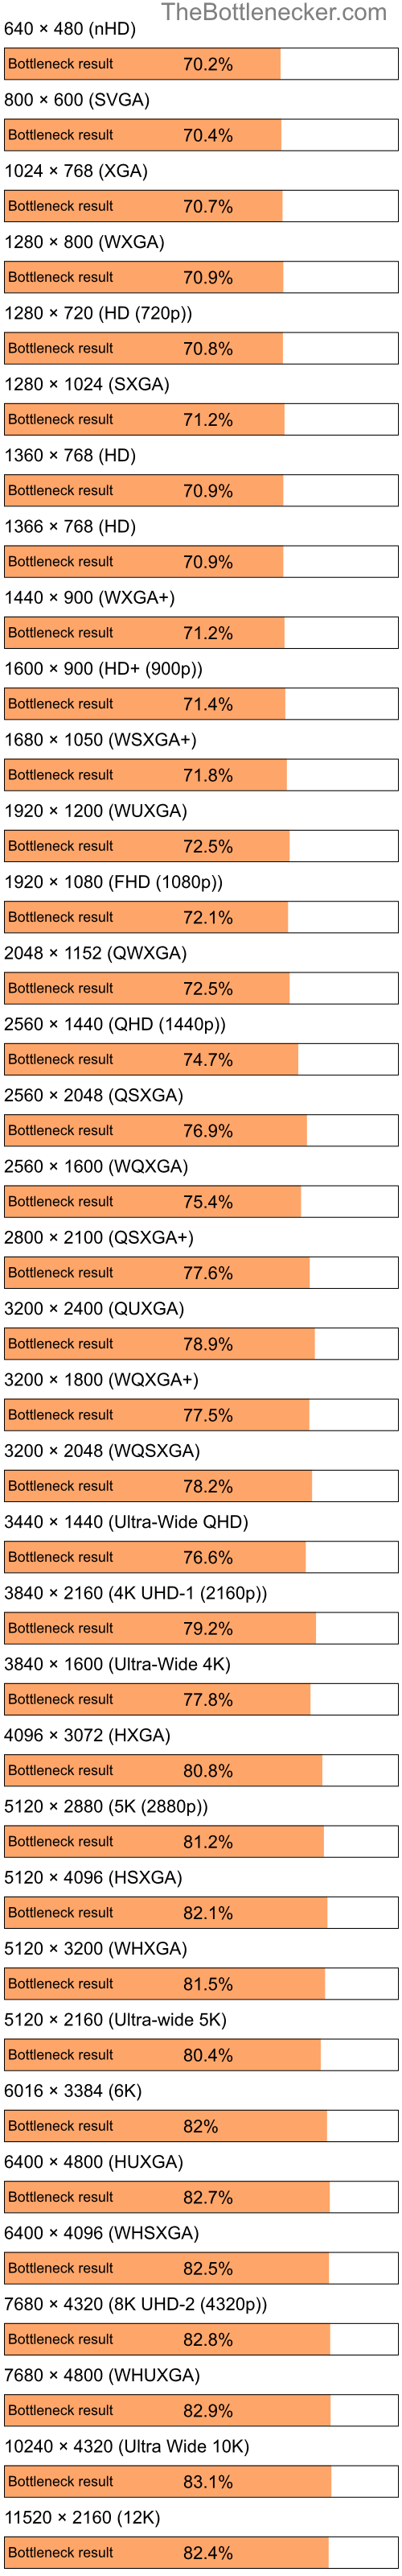 Bottleneck results by resolution for Intel Celeron and NVIDIA GeForce 9100 in Graphic Card Intense Tasks